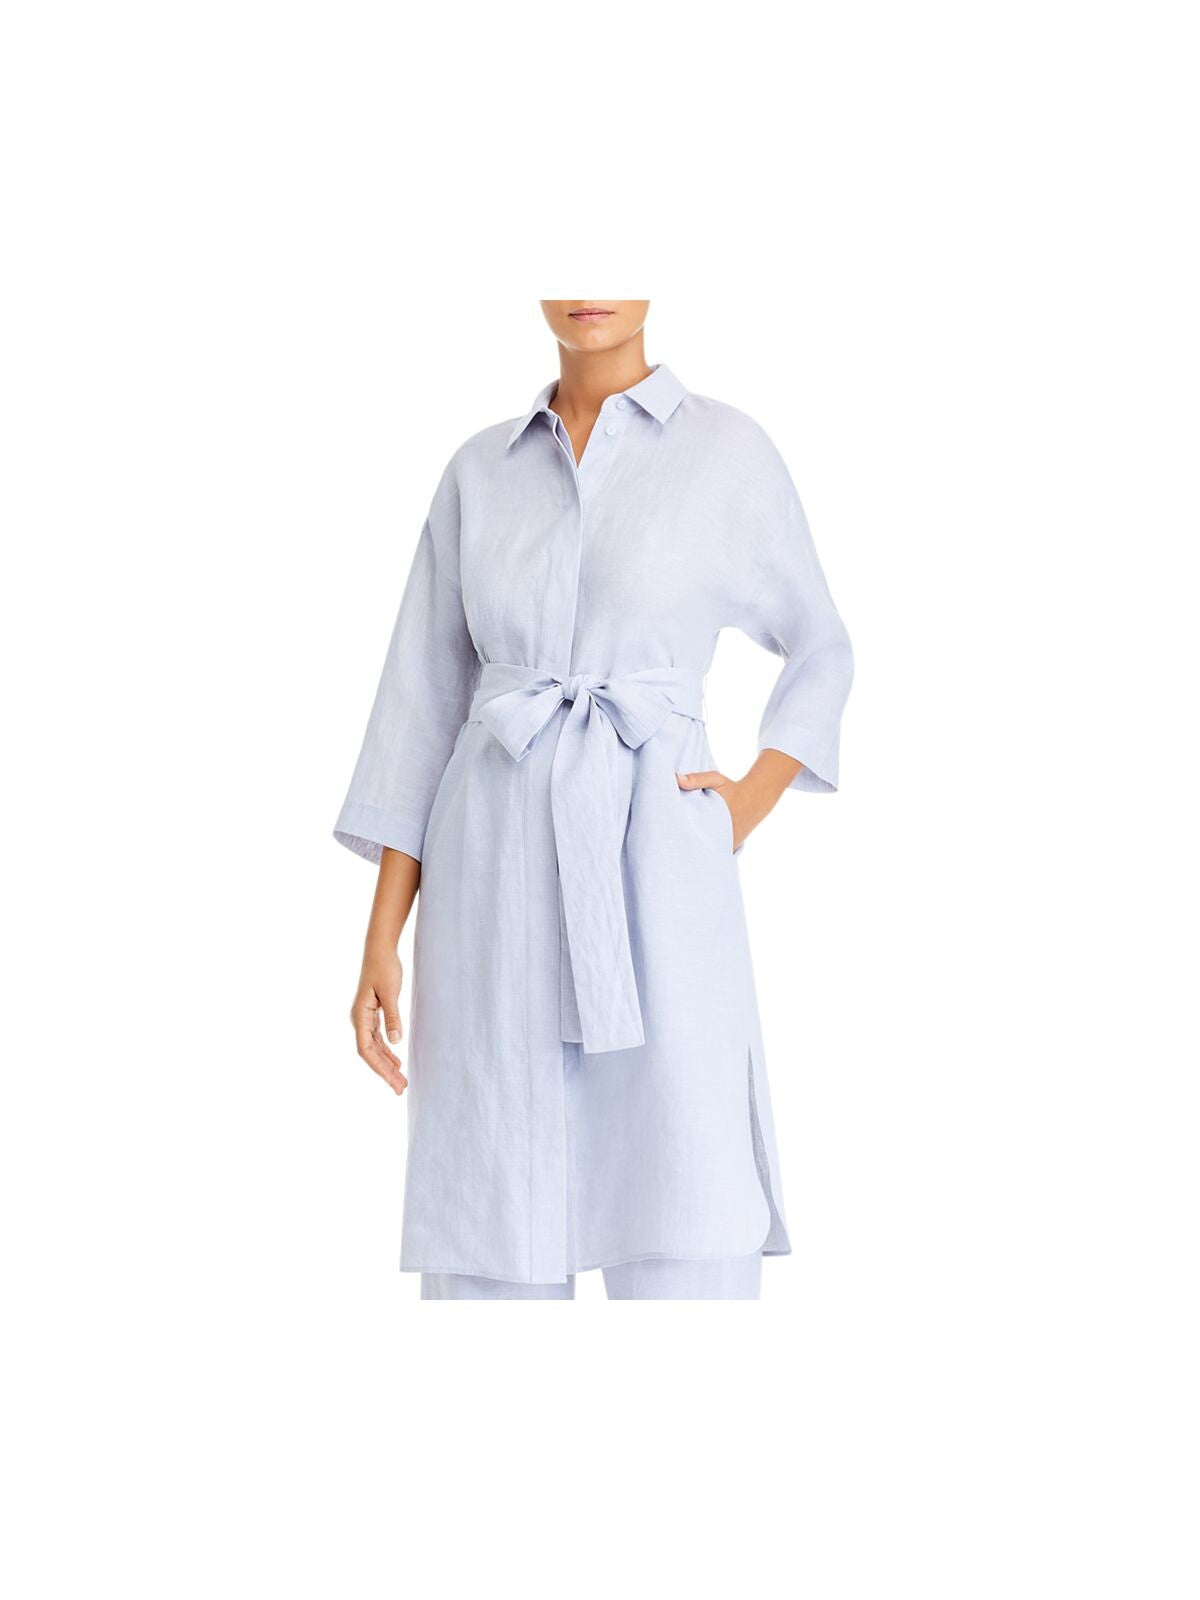 LAFAYETTE 148 Womens Blue Belted 3/4 Sleeve Collared Duster Top Size: XS